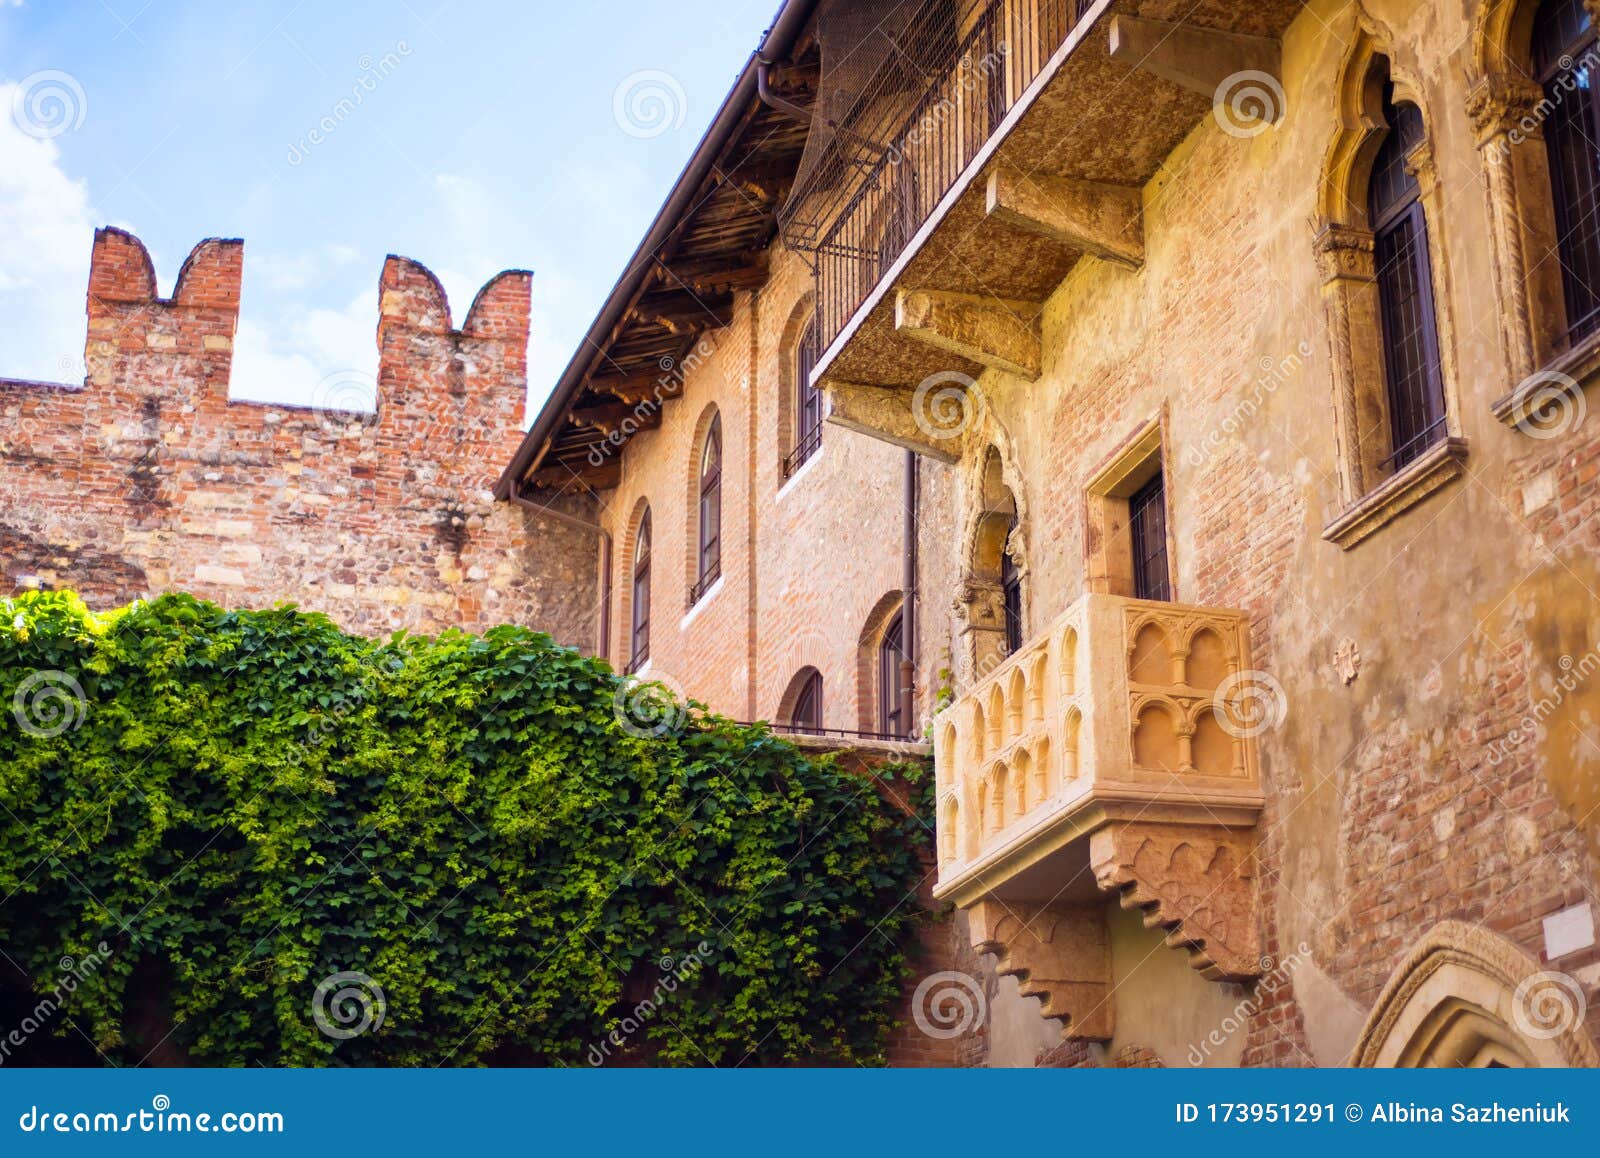 courtyard of casa di giulietta house of juliet with famous balcony of juliet from drama william shakespeare romeo and juliet in